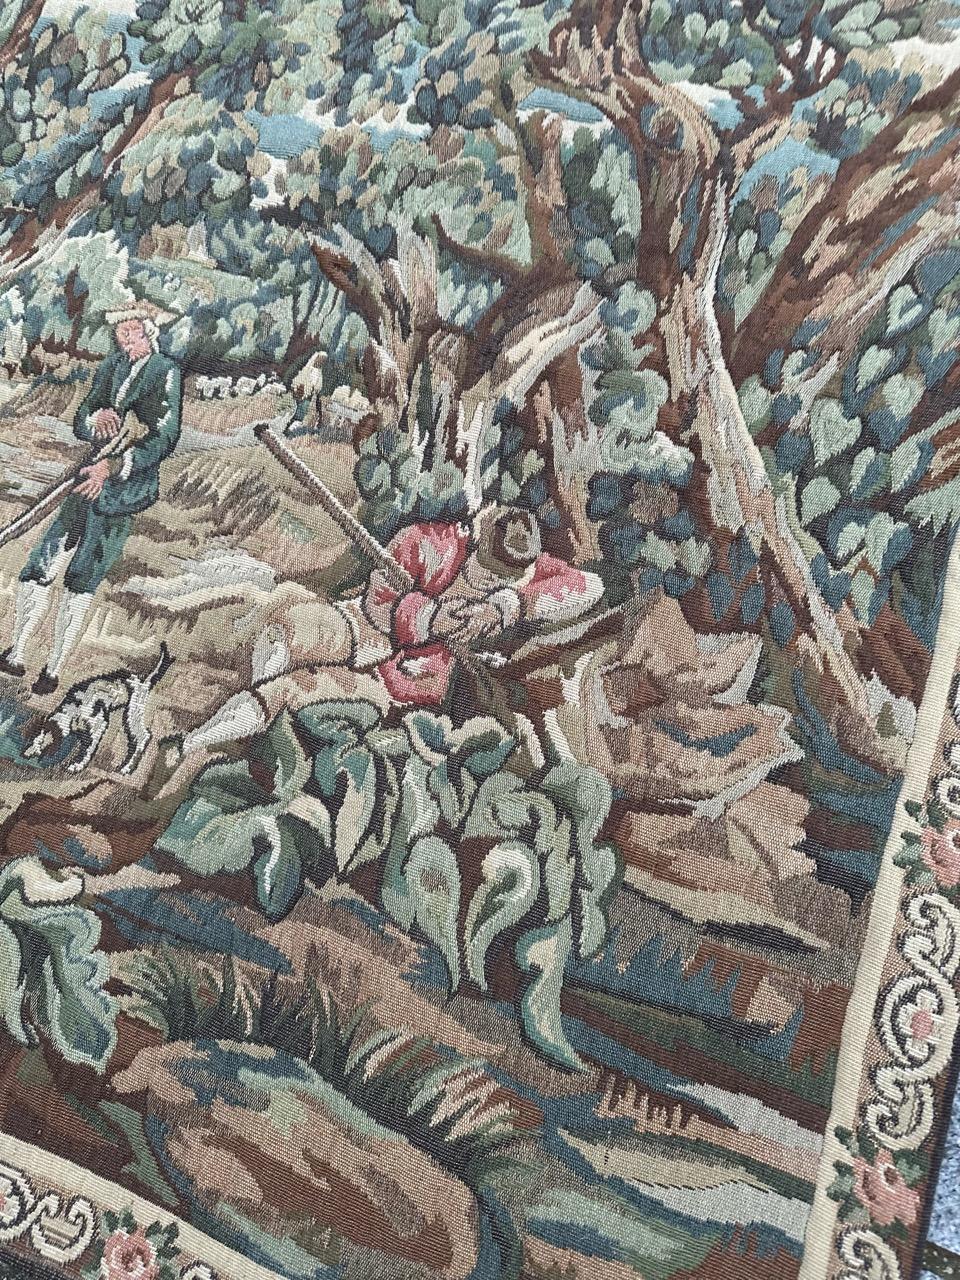 Halte des Chasseurs (hunters' stop)
Beautiful tapestry from the second half of the 20th century, crafted on Jacquard looms using wool and cotton with lovely shades of green and an exquisite design. Inspired by an 18th-century Aubusson tapestry, it